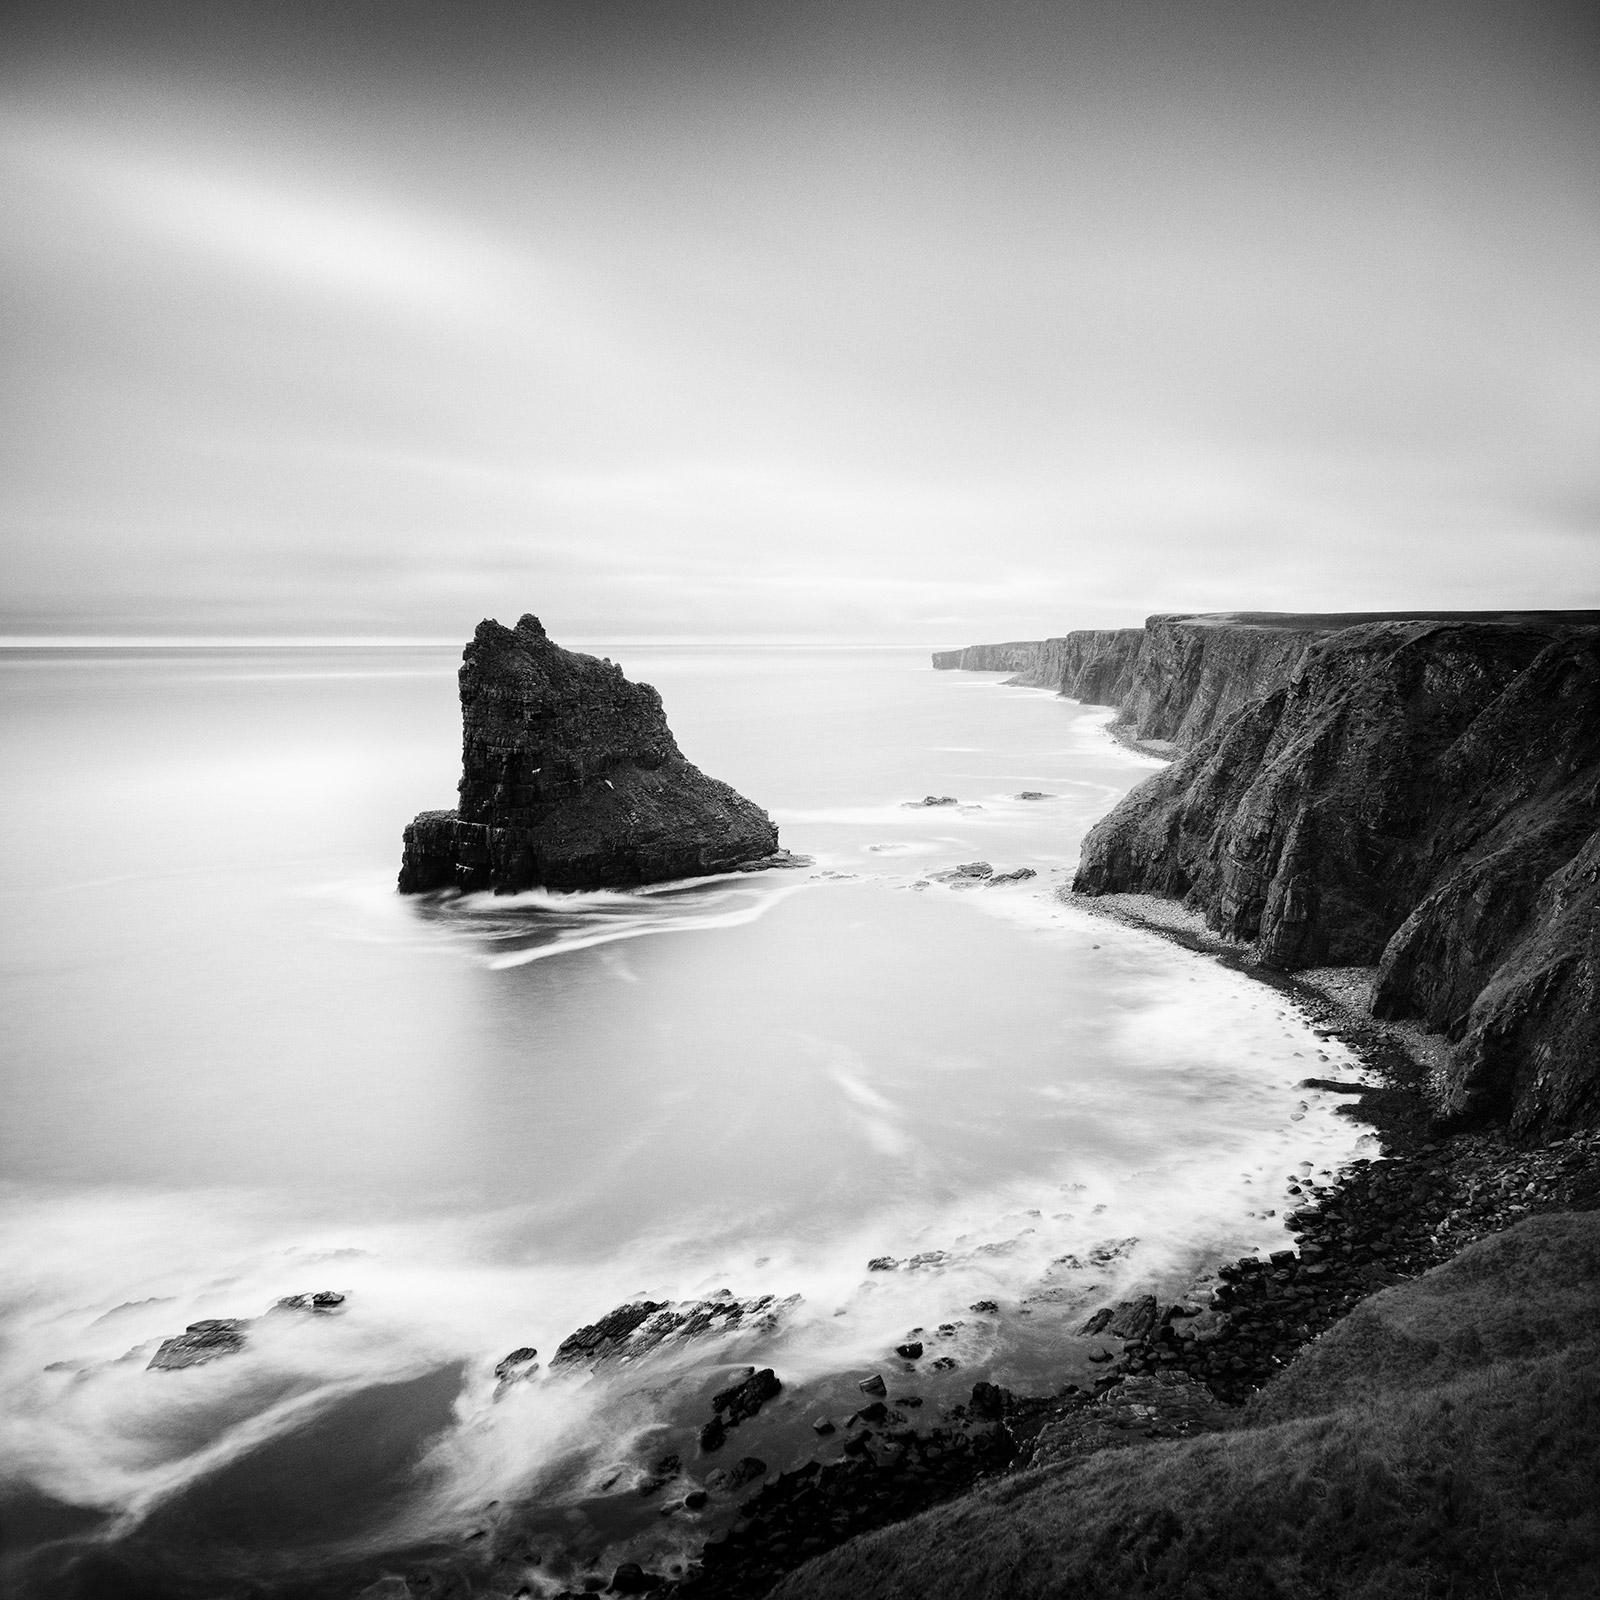 Gerald Berghammer Black and White Photograph - Surreal Moment, Cliff, Island, Scotland, black and white photography, landscape